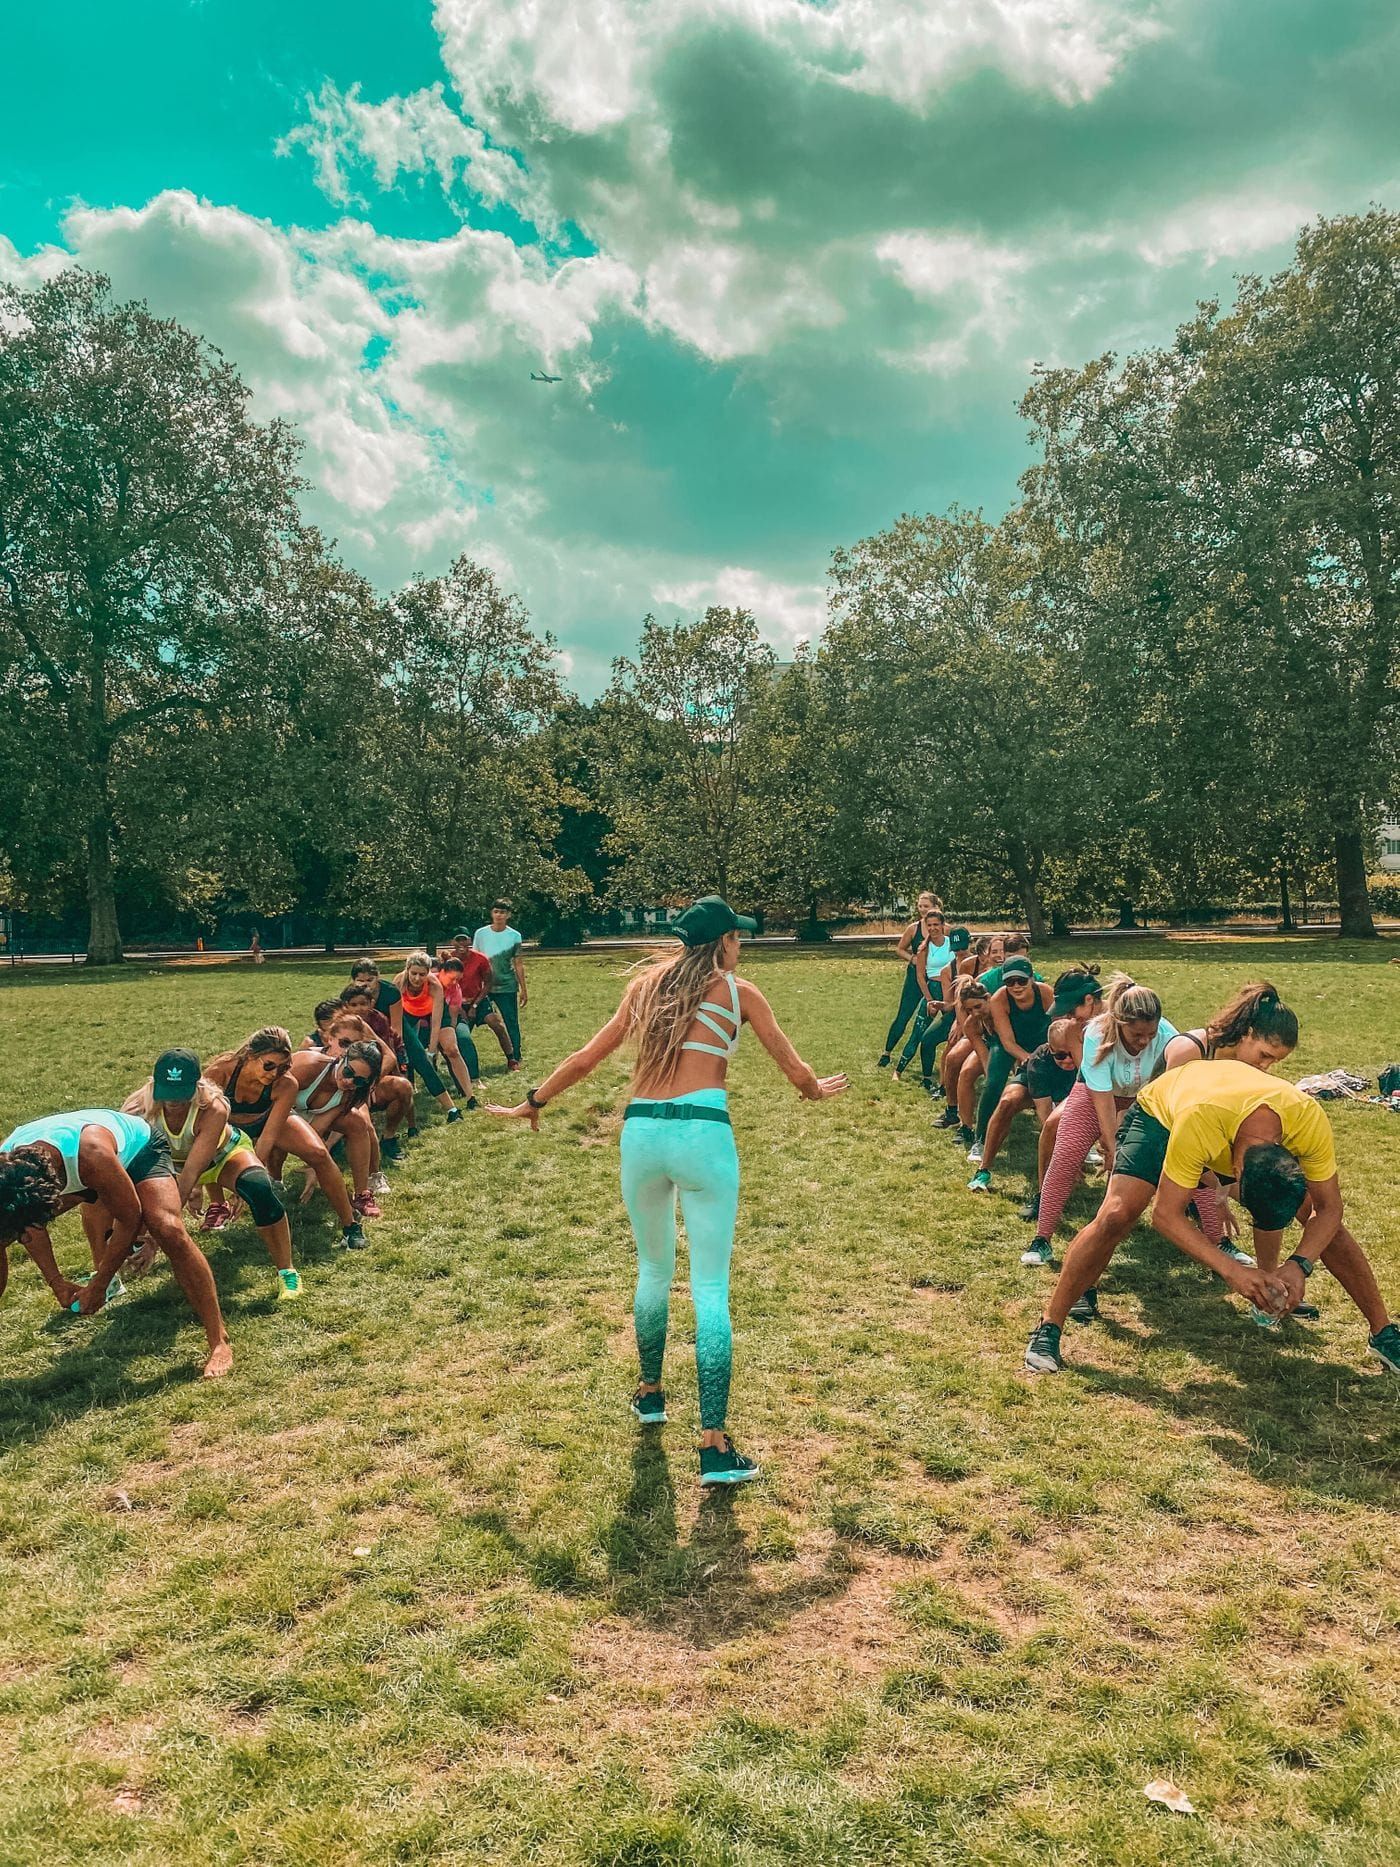 Why workout?

[Simple question with big answers](https://buafit.co.uk/blog/p/why-workout)

Jump in to this week's hottest classes with [@Andressa](/u/Andressa) [@angparvez](/u/angparvez) [@pilatesbynicolec](/u/pilatesbynicolec) [@shuntao](/u/shuntao)